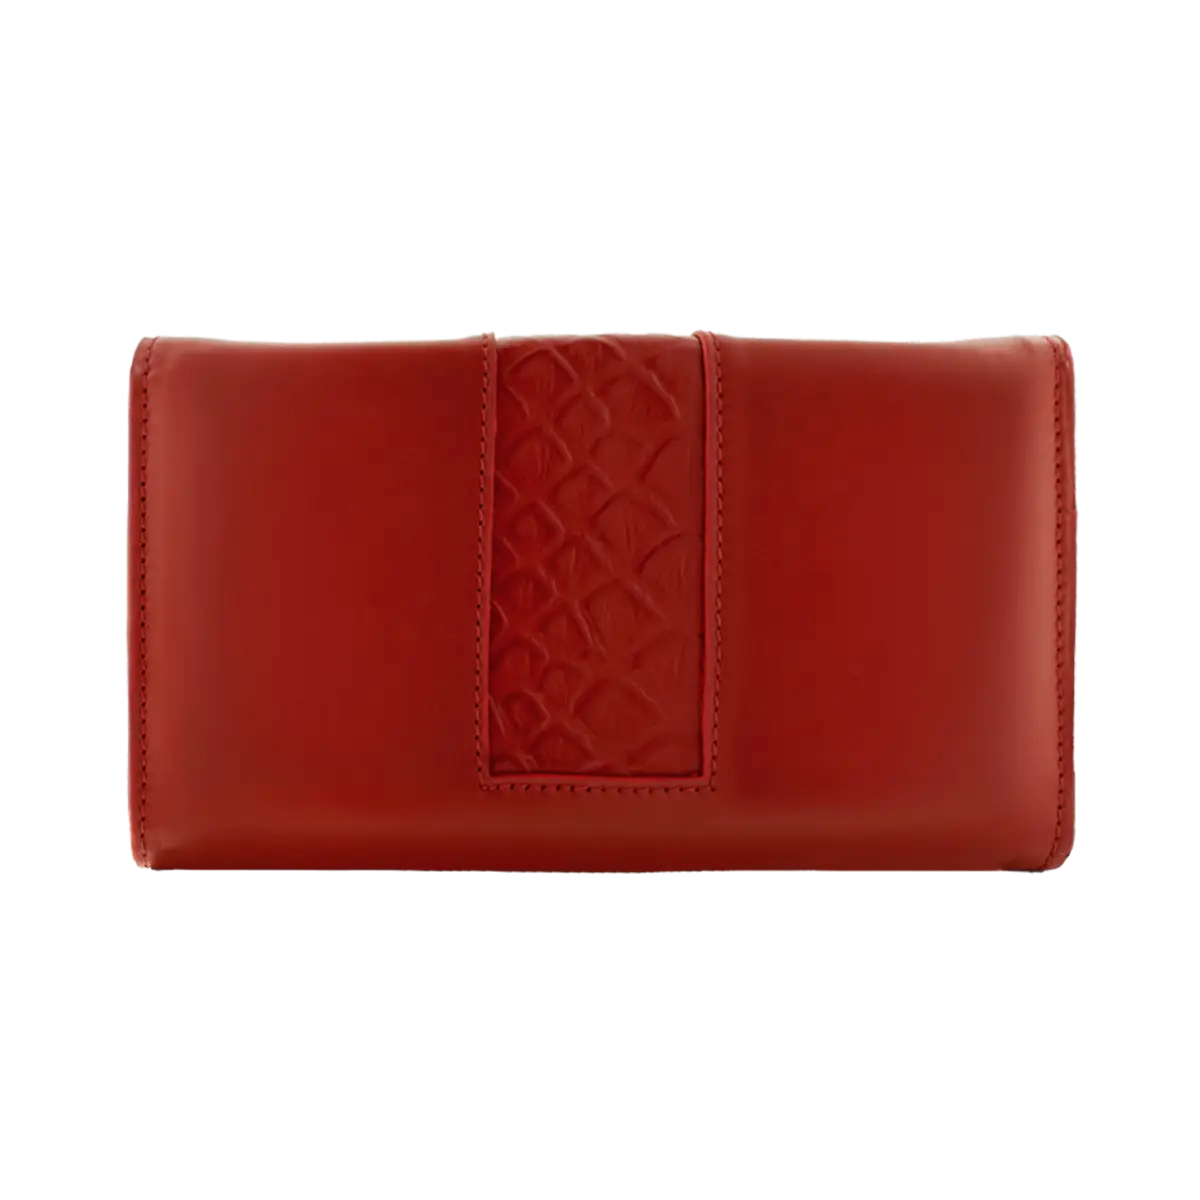 large red leather wallet for women. Fashion accessories for women, shop in San Diego, CA.